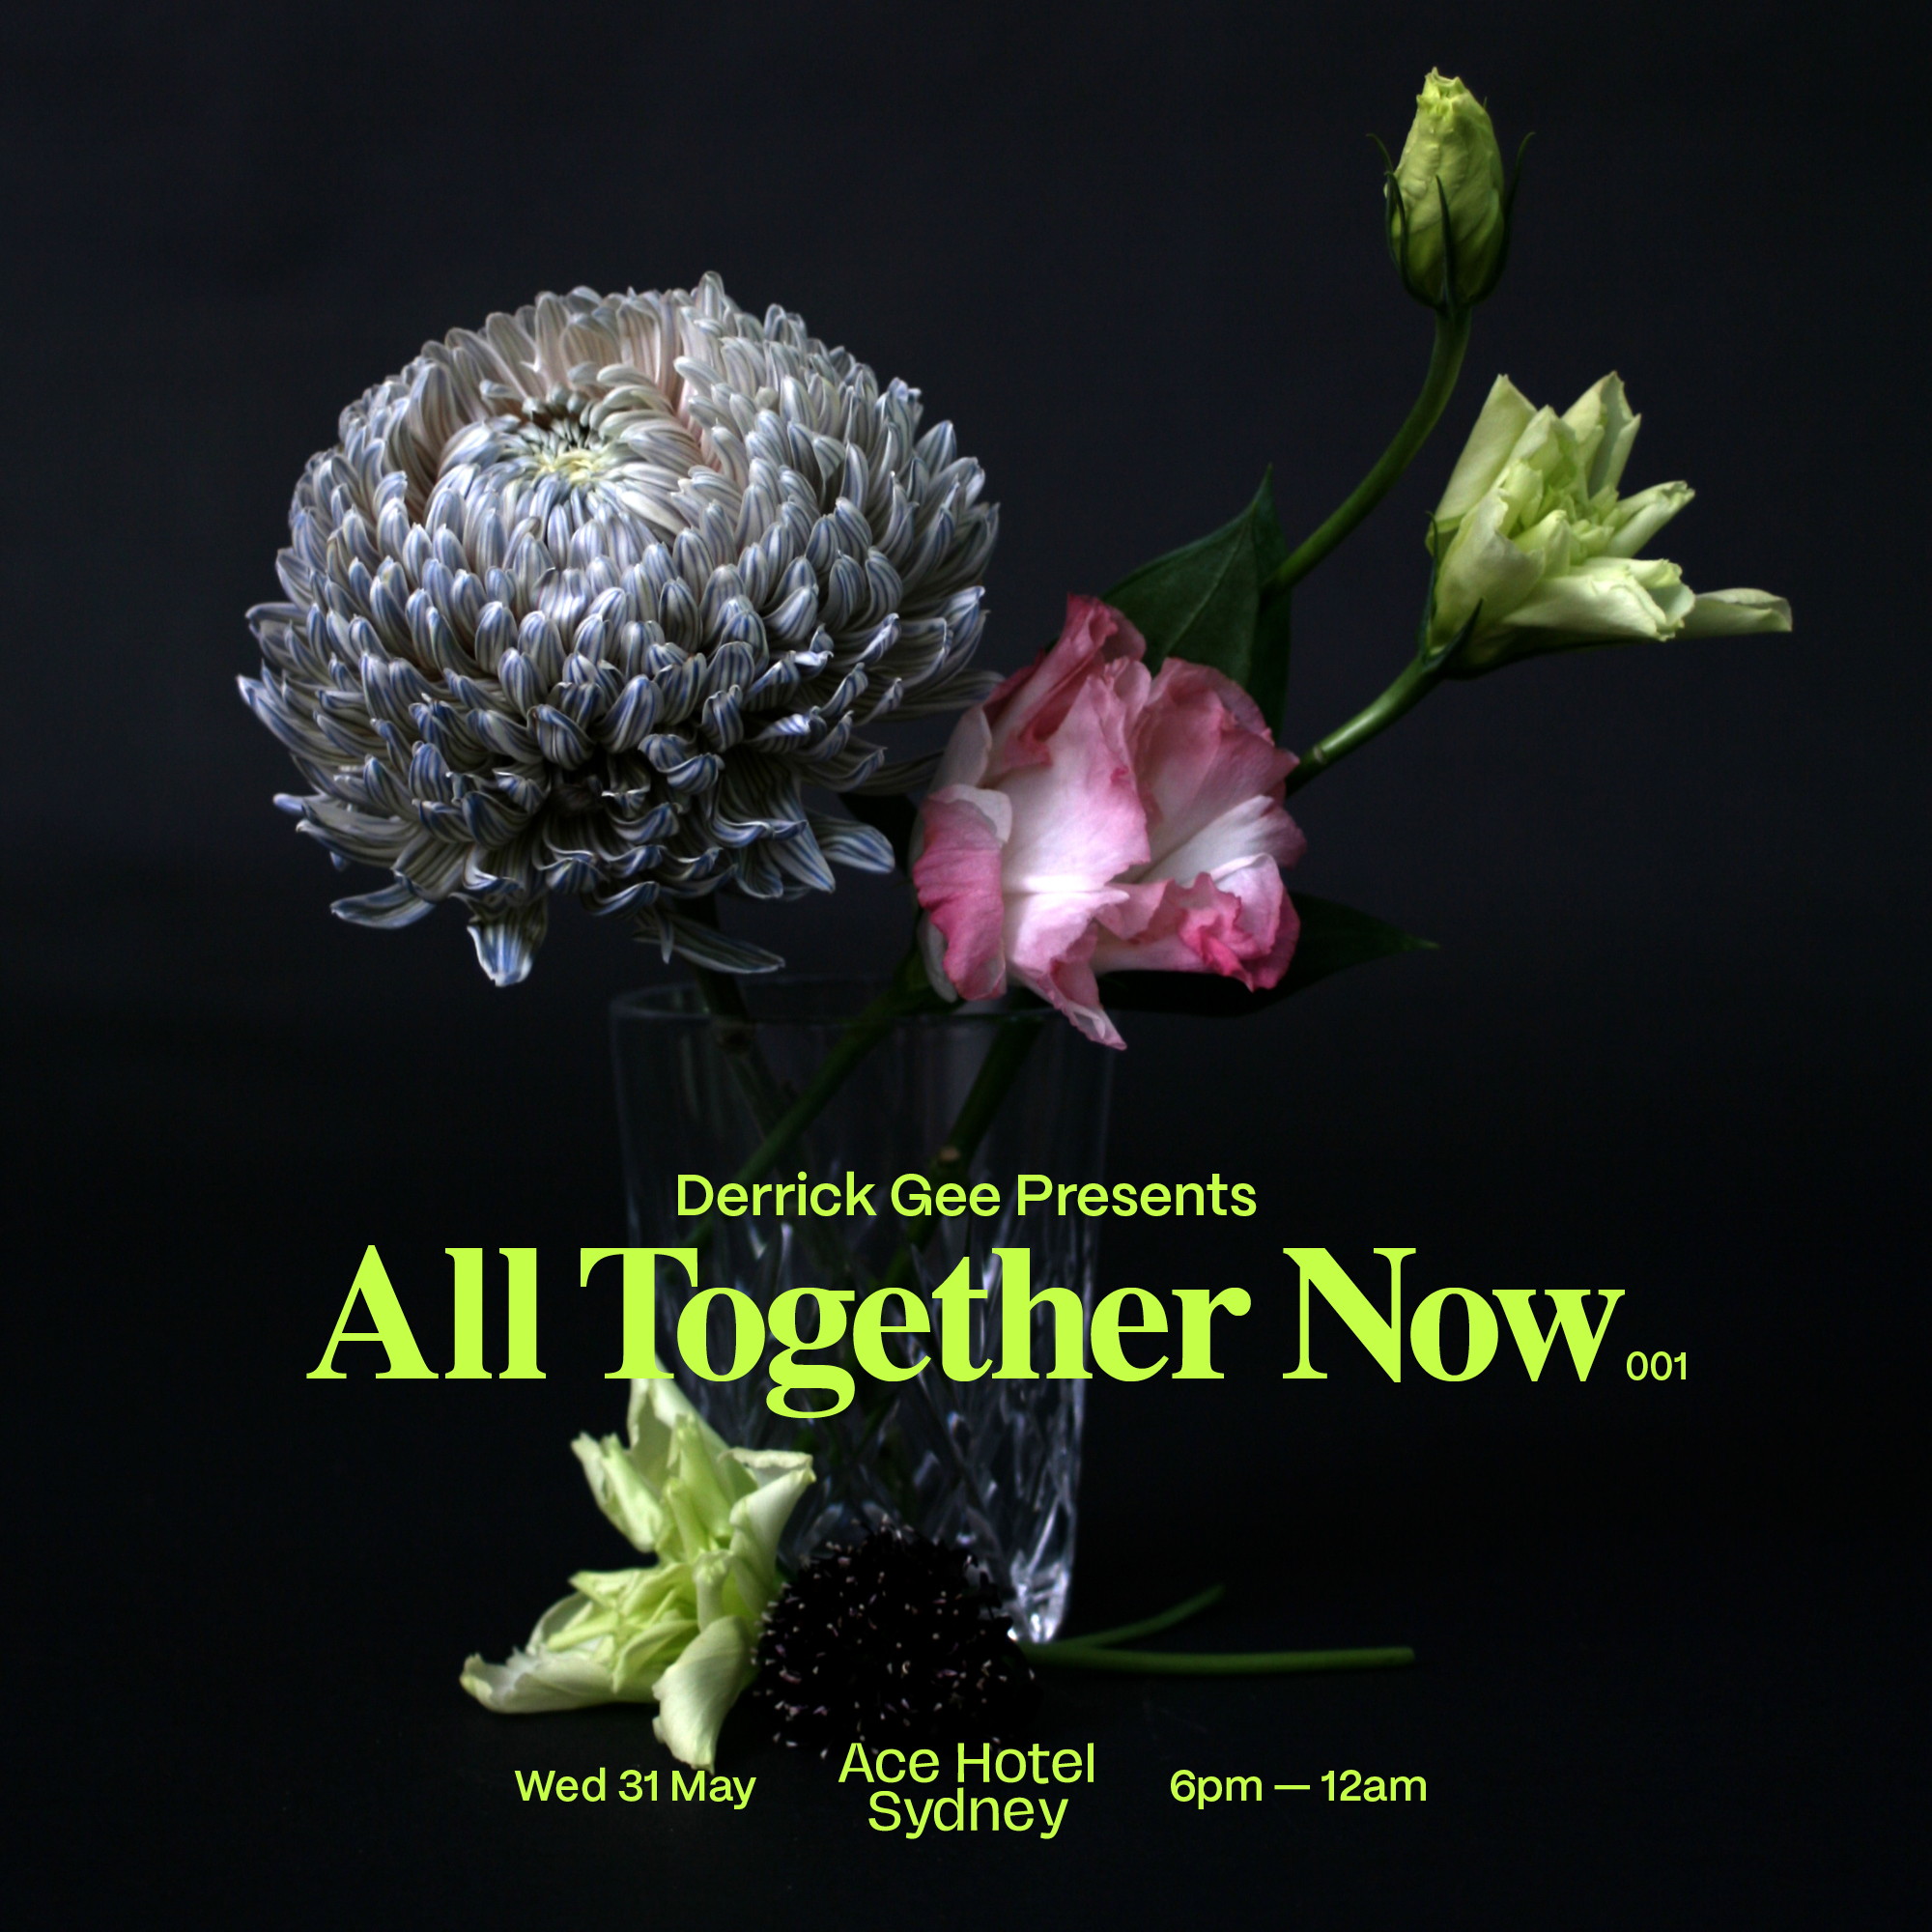 All Together Now with Derrick Gee - May 31